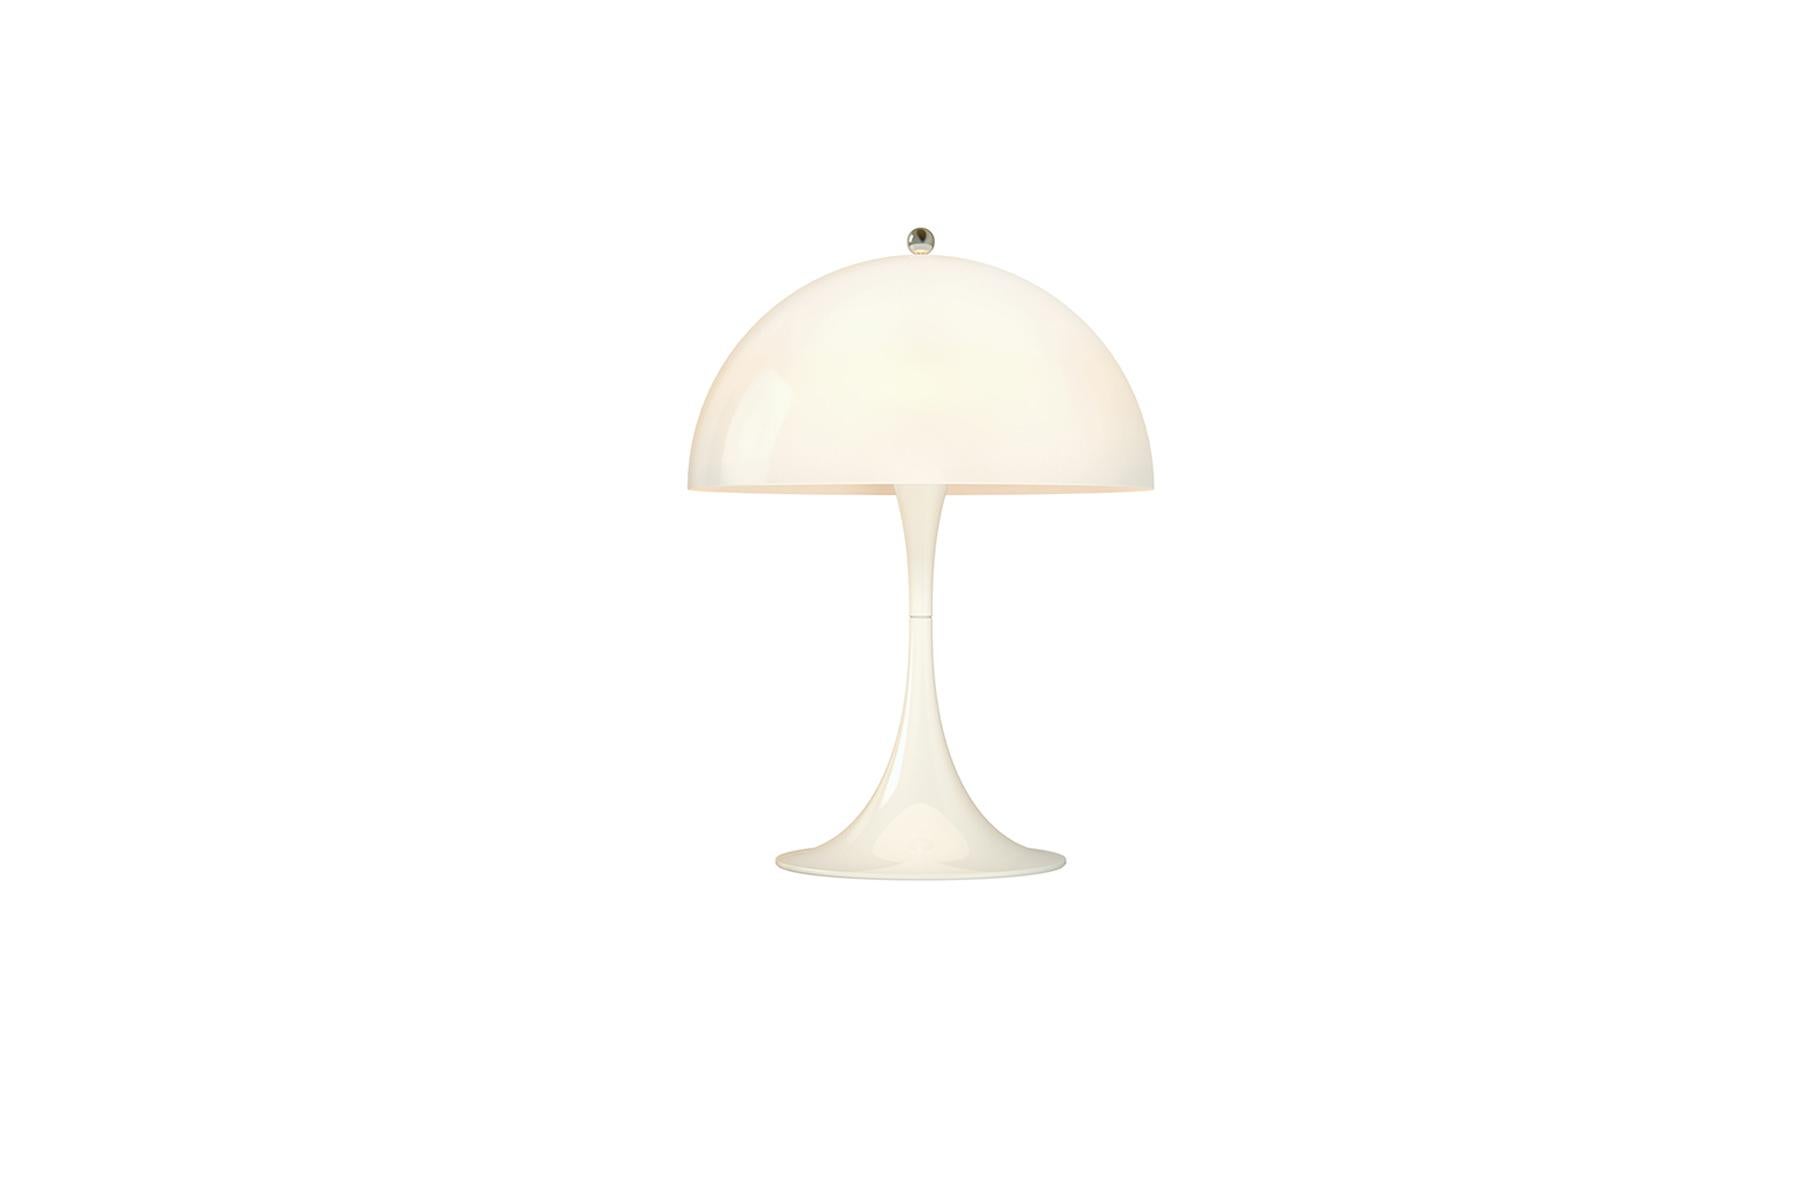 The fixture emits a soft and comfortable illumination. The metal version directs the light directly downwards and creates a soft and comfortable illumination due to the inner white painted shade and the reflection from the trumpet shaped stem. The